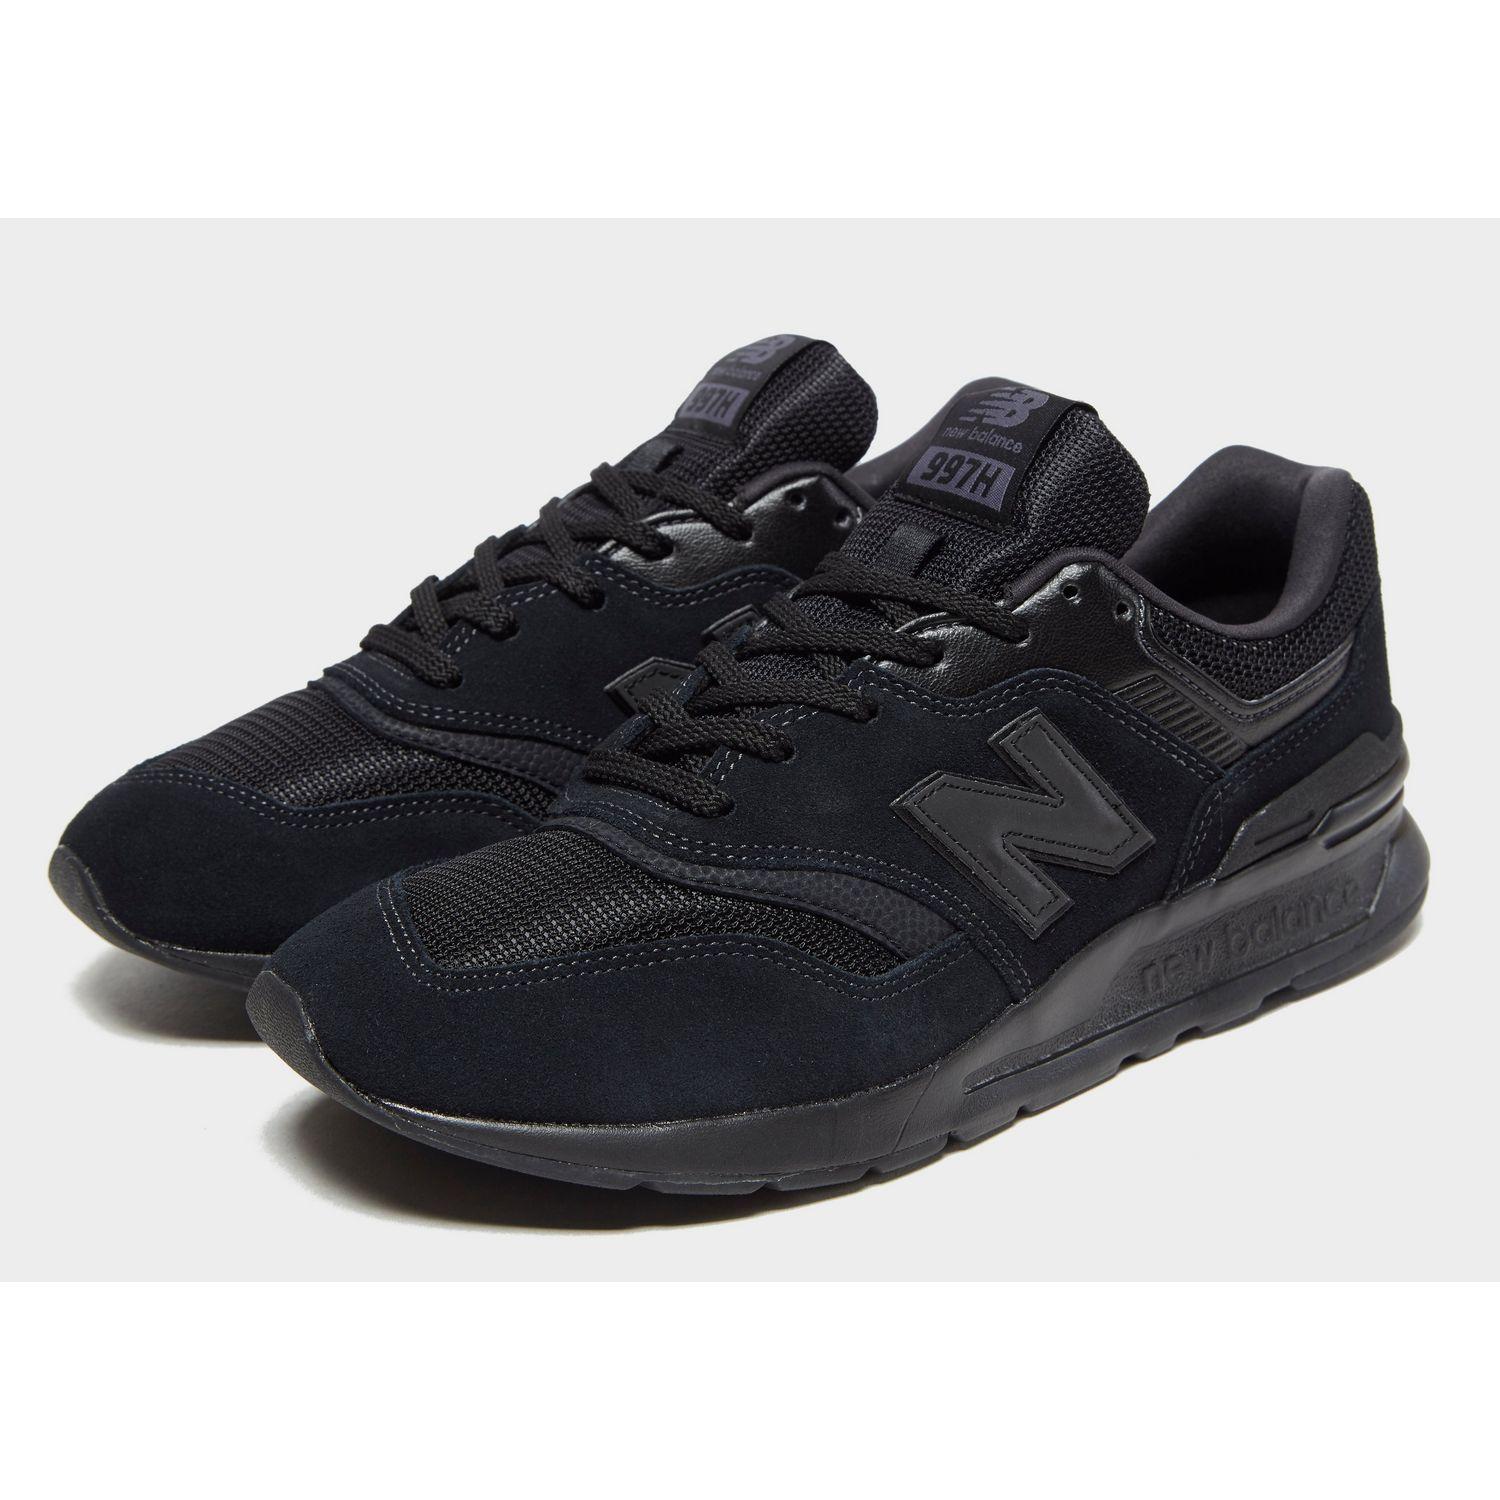 New Balance Suede 997h in Black for Men - Lyst